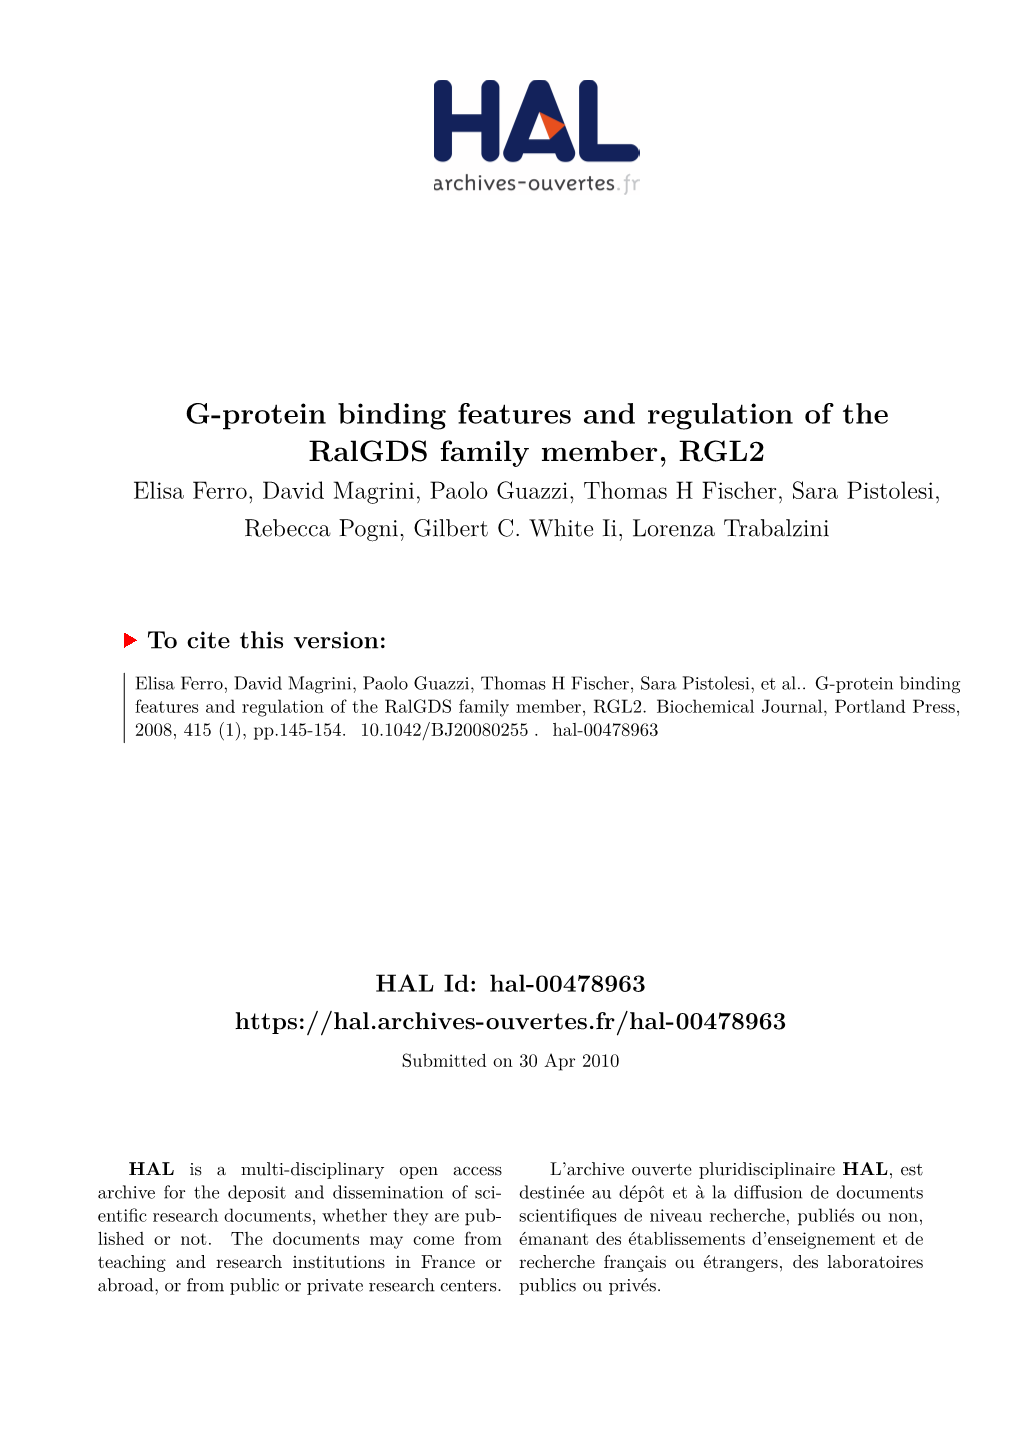 G-Protein Binding Features and Regulation Of